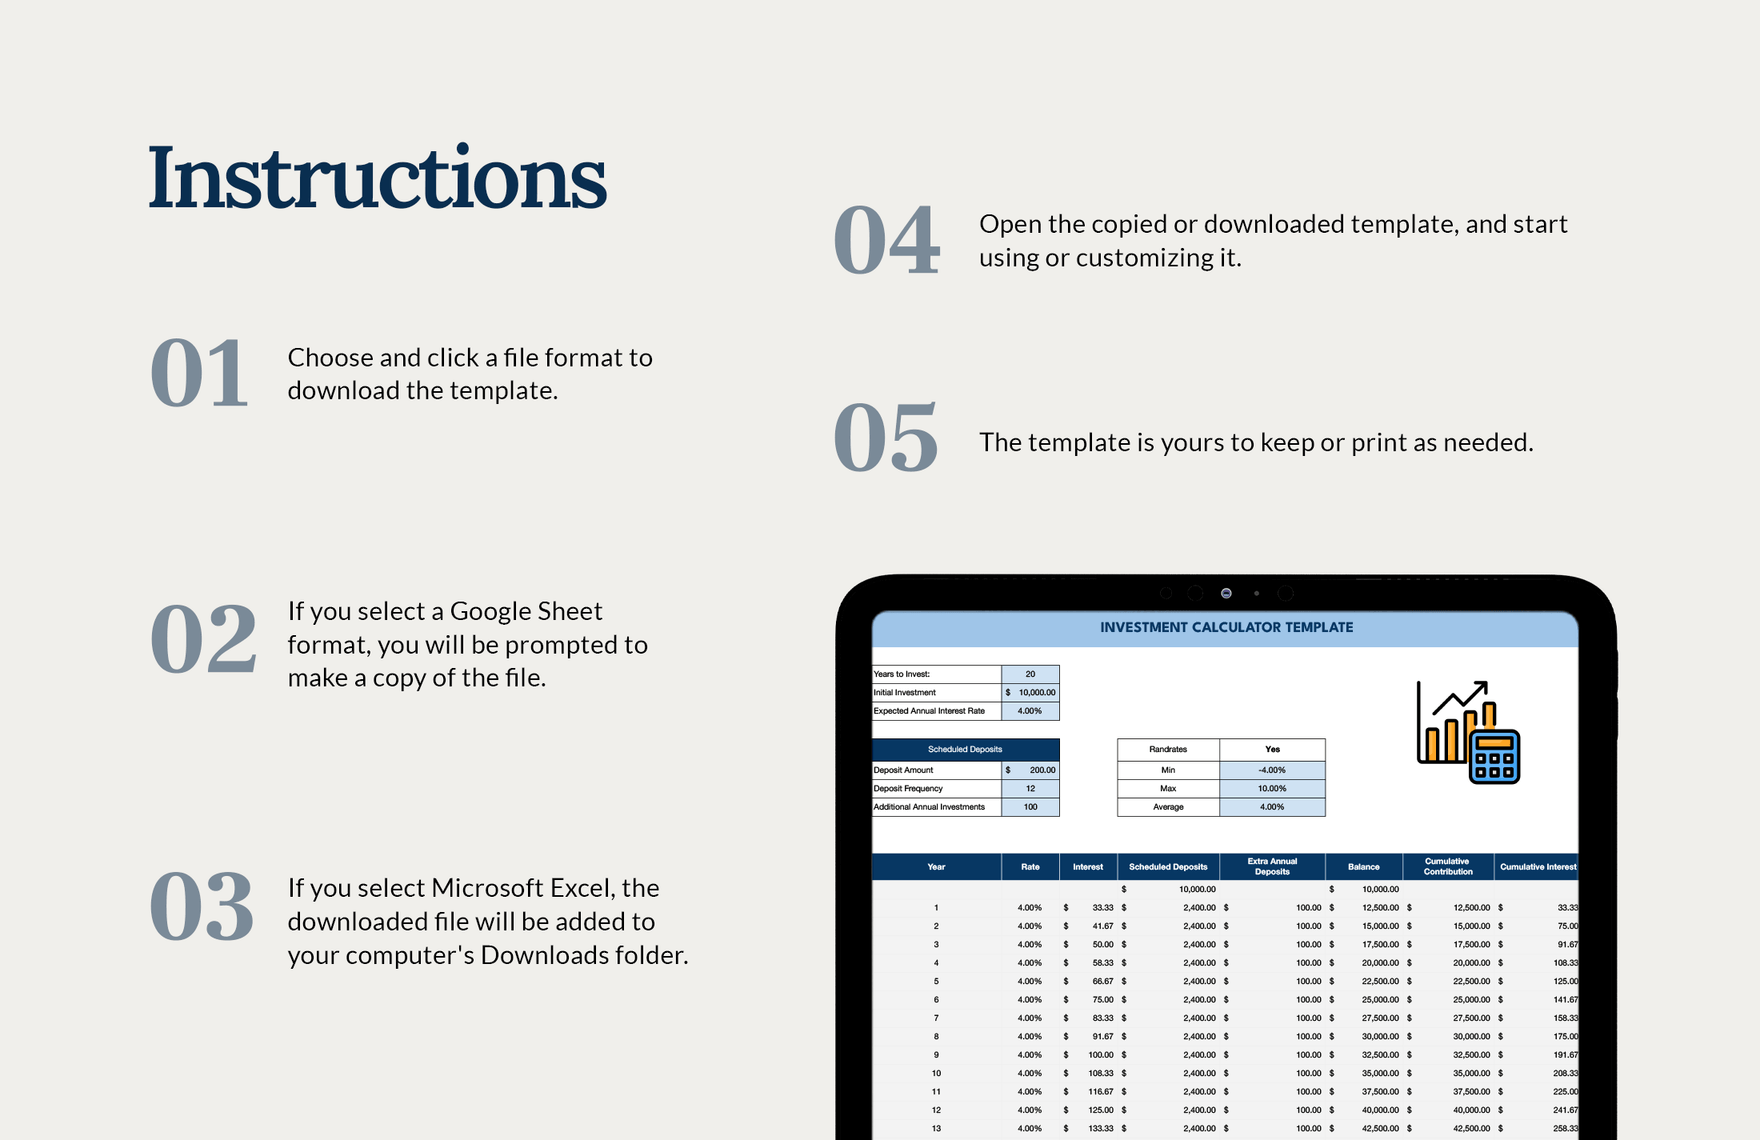 Investment Calculator Template